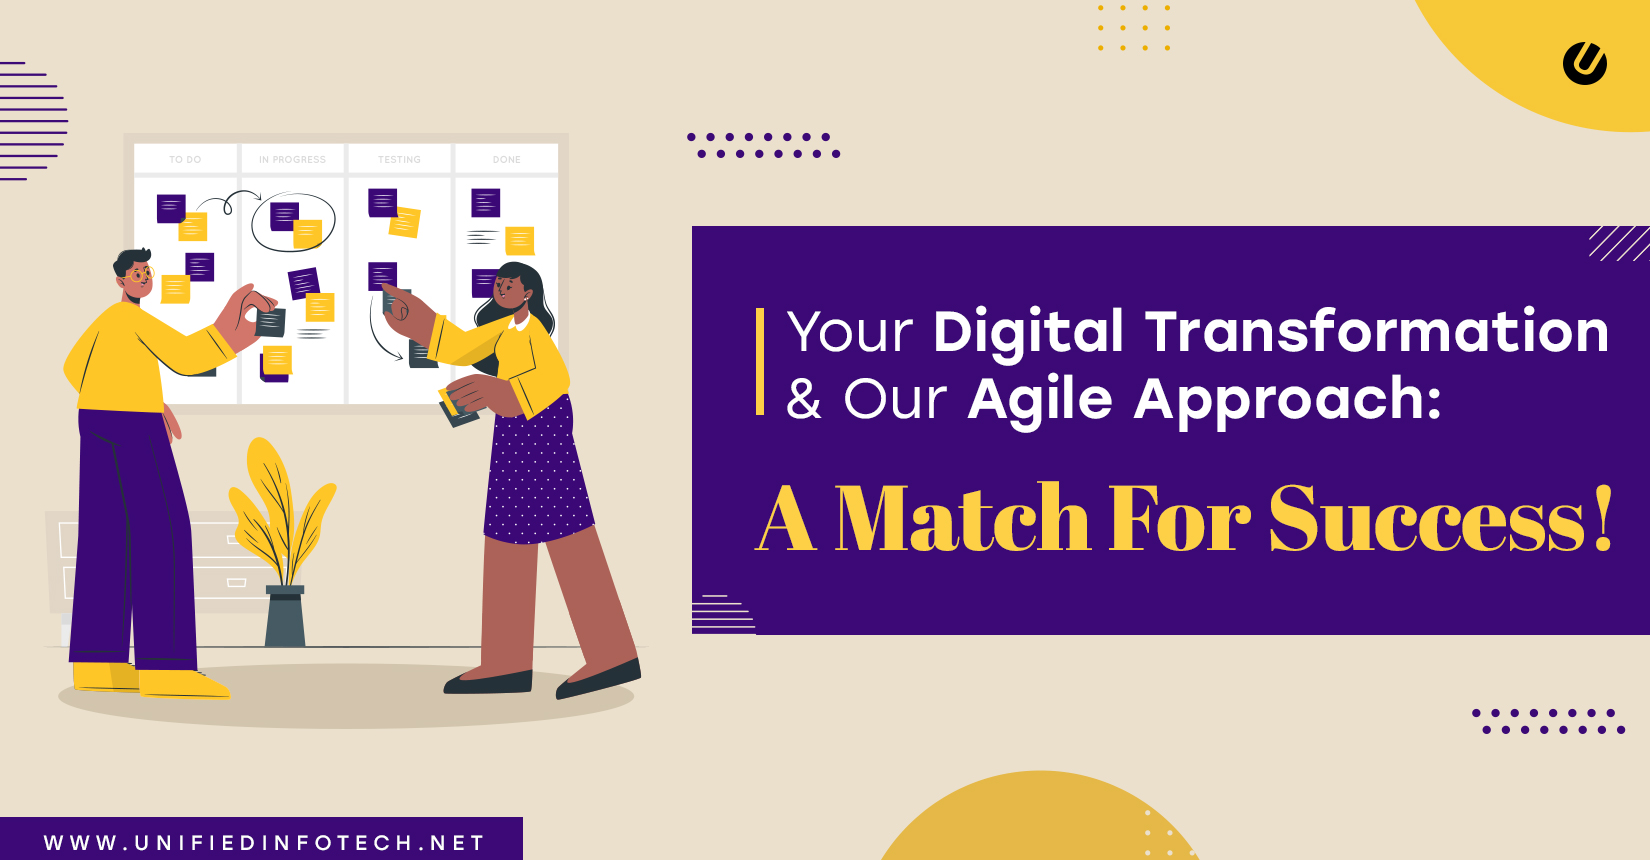 How We Use Them To Enhance Digital Transformation Process